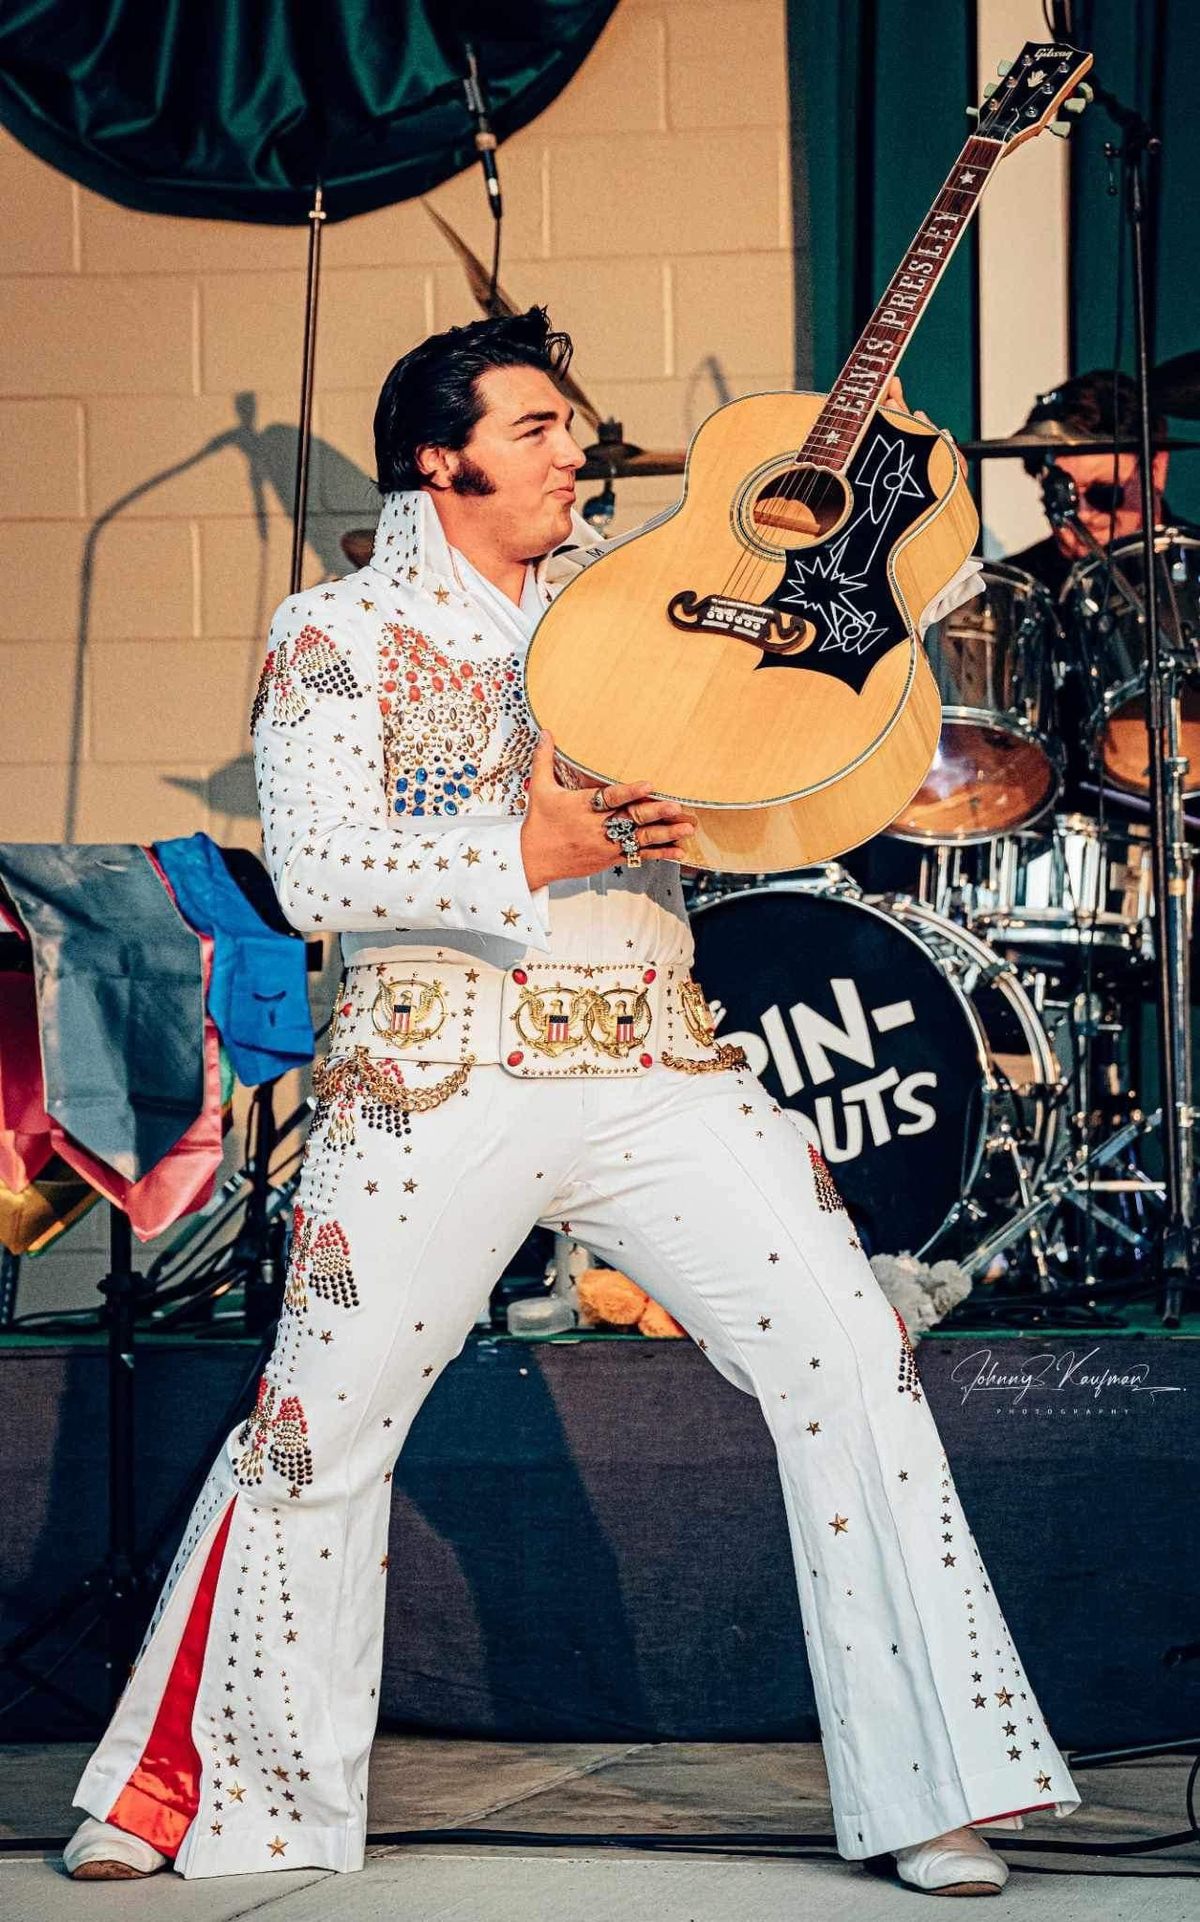 "Elvis" is coming to Mountain View